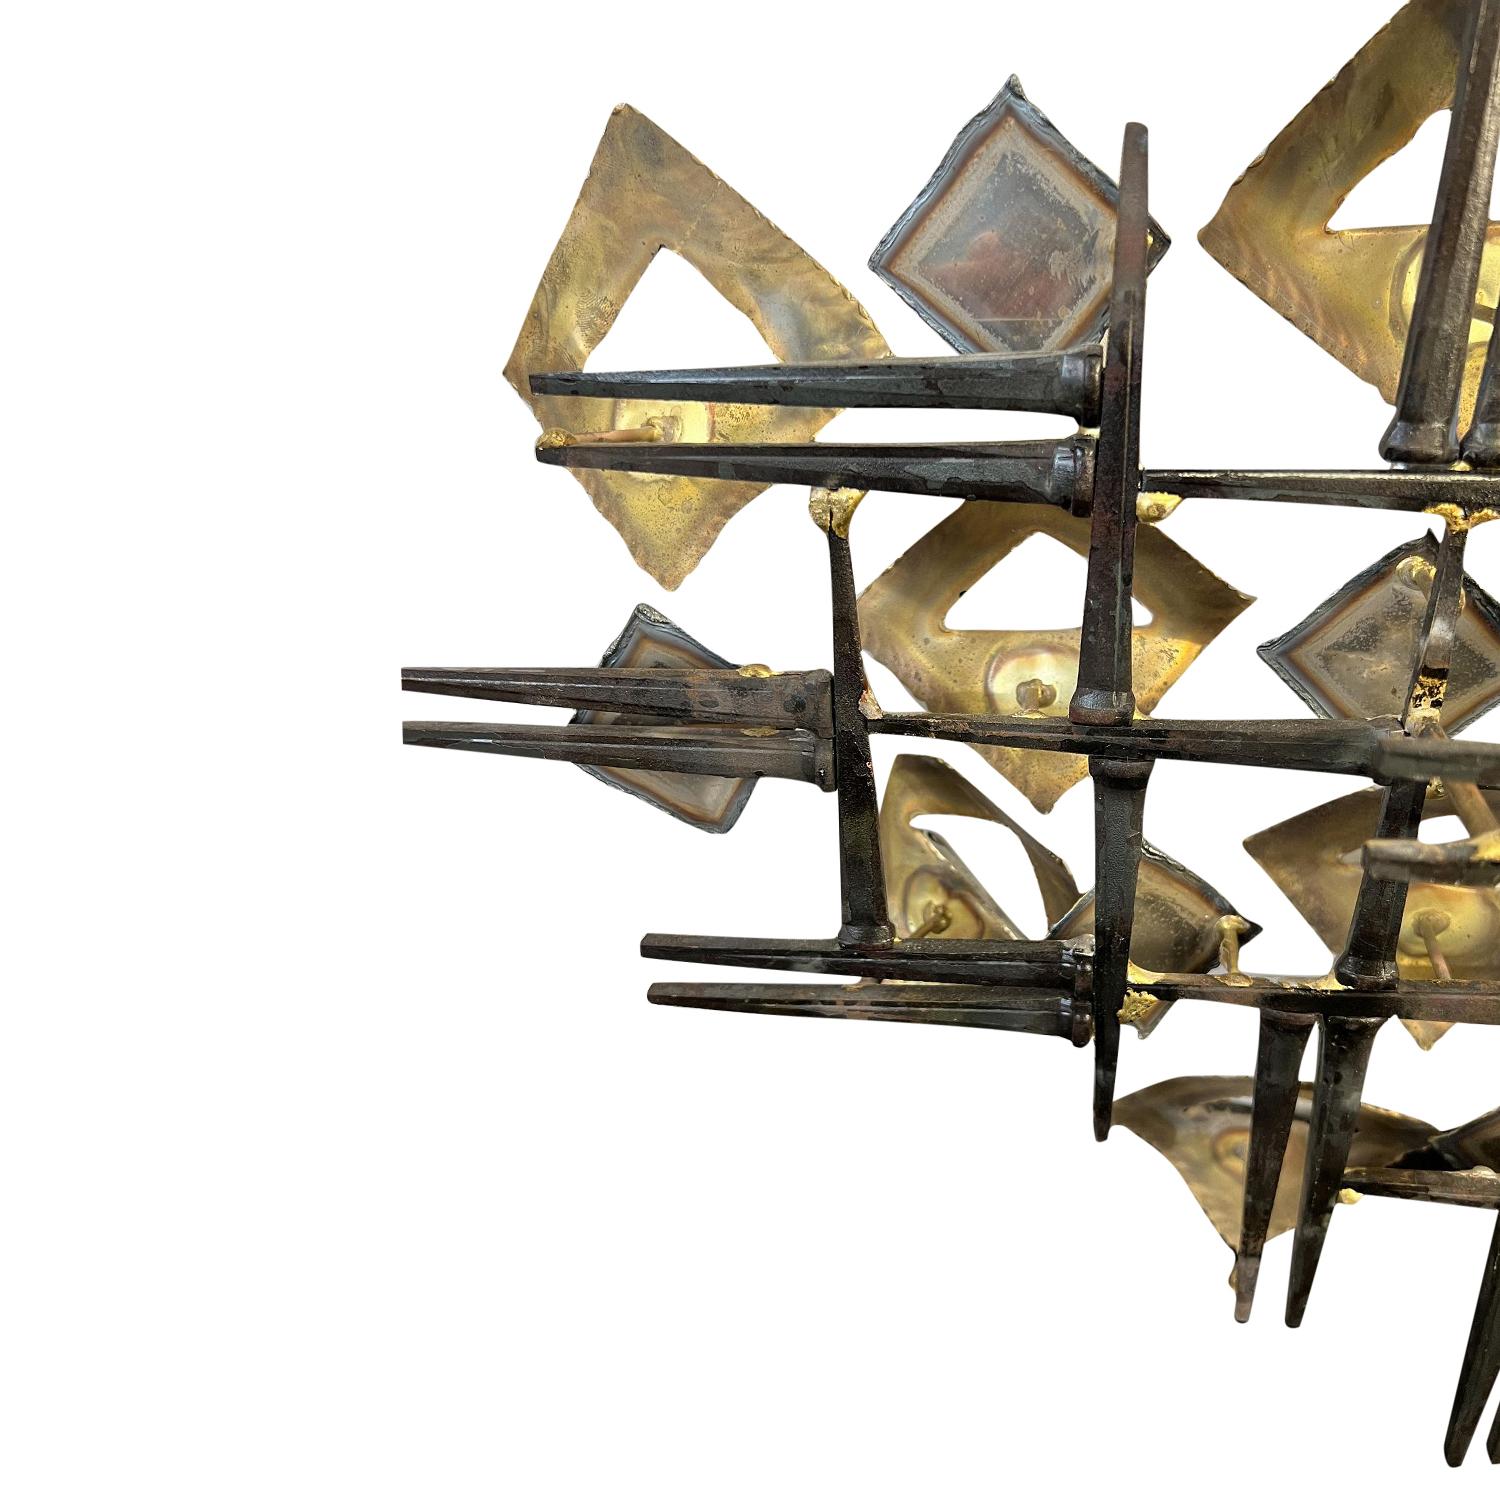 20th Century American Abstract Brutalist Metal Wall Sculpture by Linda Casetti For Sale 3